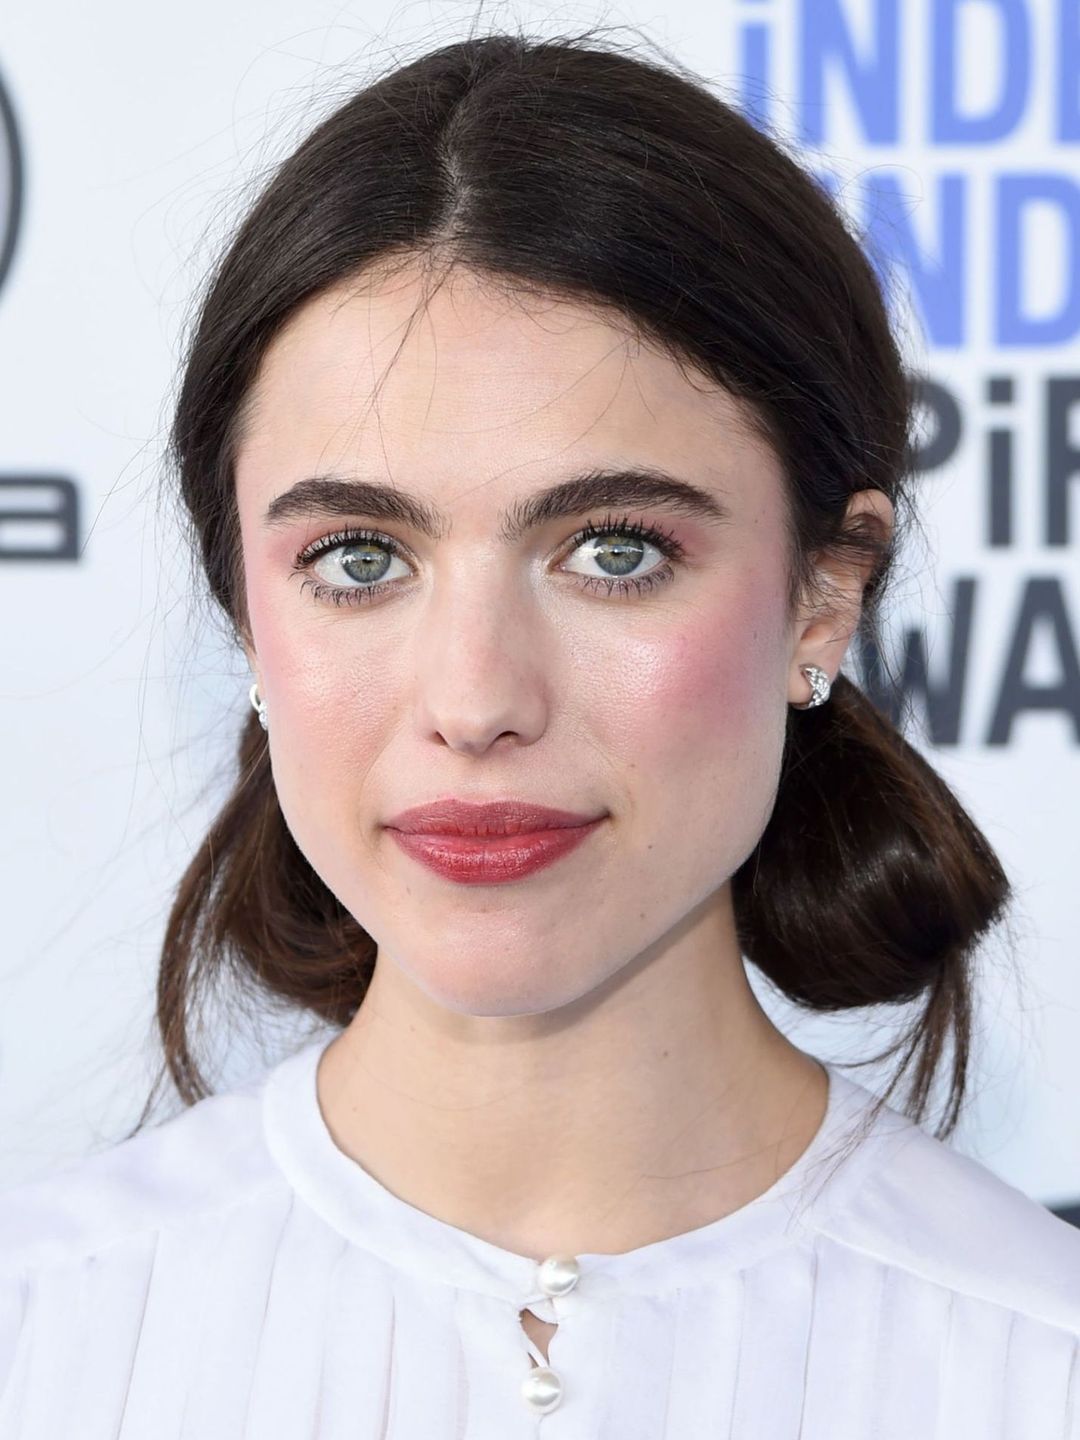 Margaret Qualley who are her parents